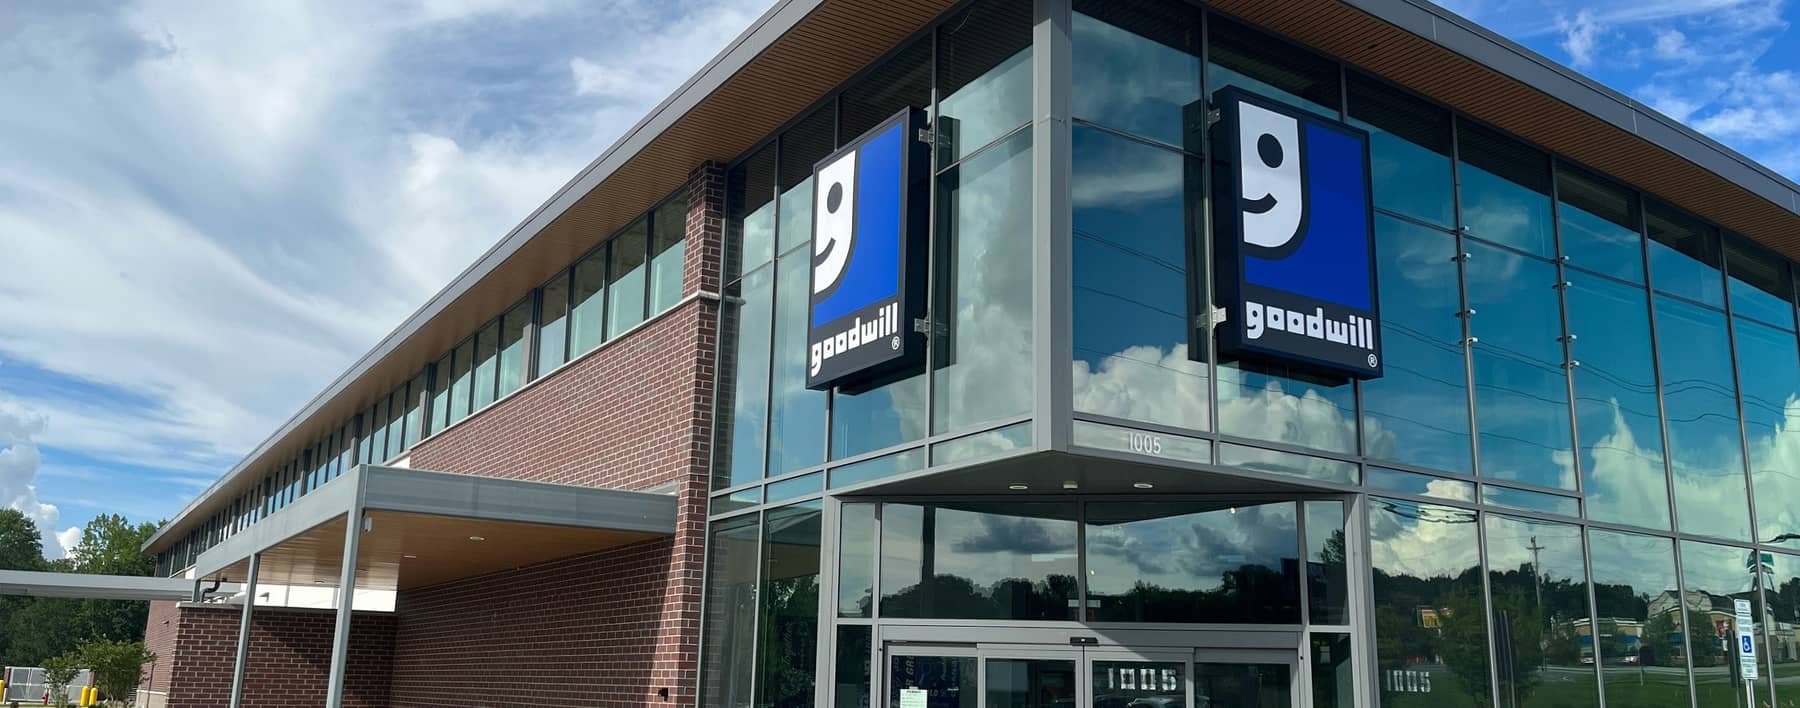 Goodwill Store Remodel in Shelby, NC | GLR, Inc.